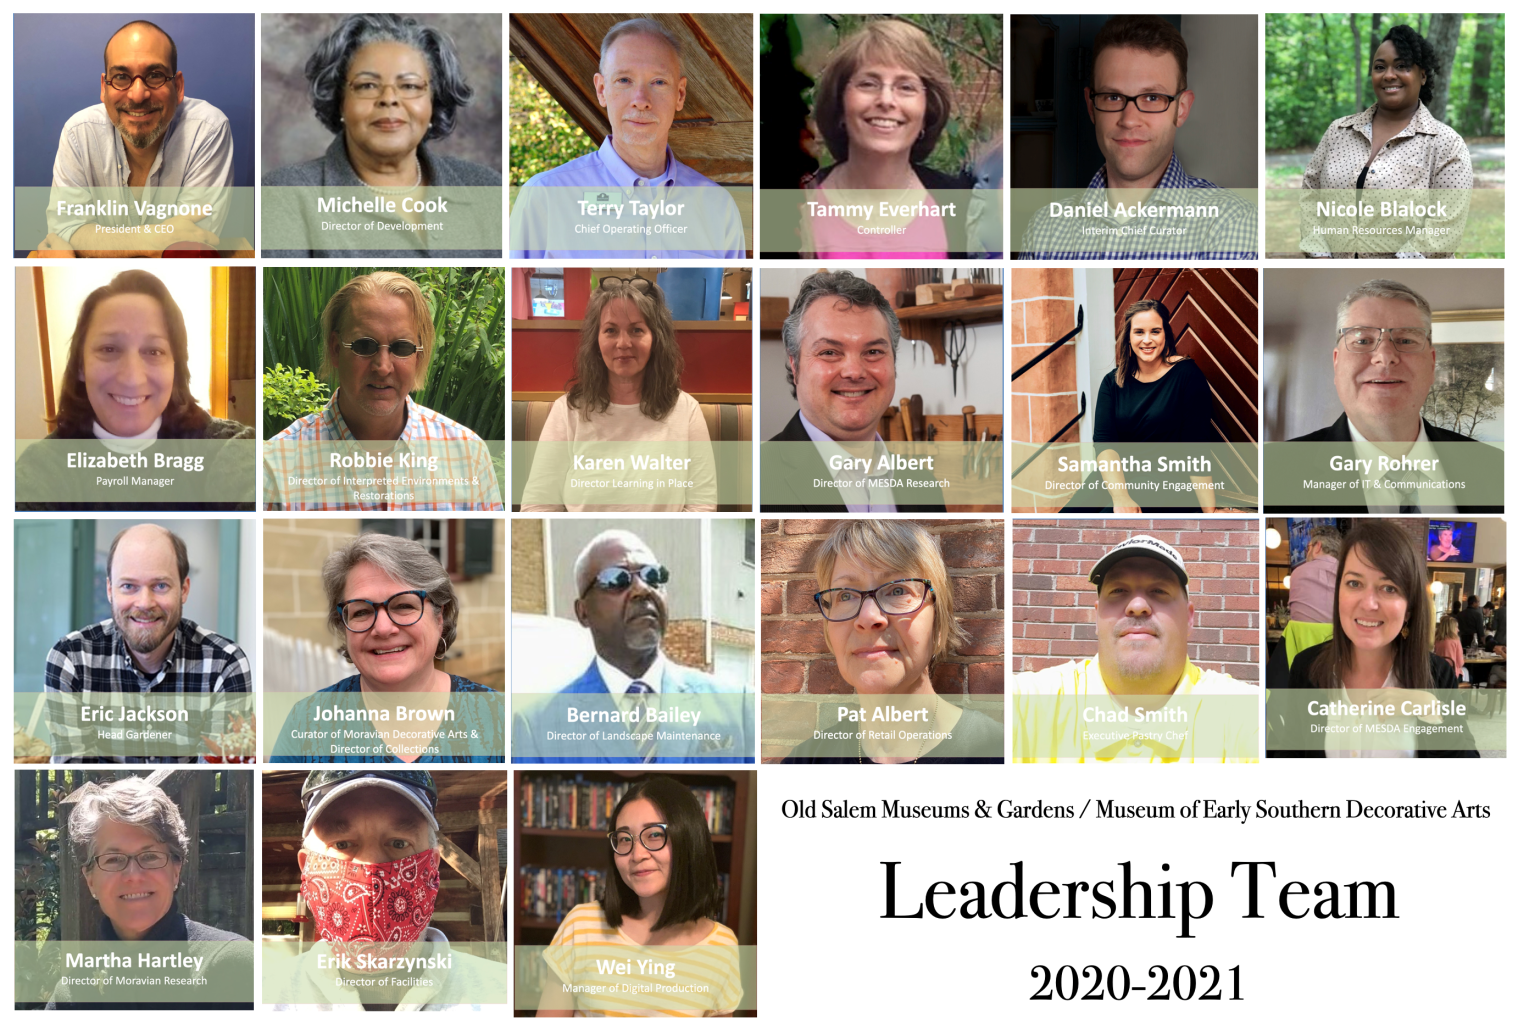 A grid of photos showing the twenty-one members of the leadership, a diverse group of people from every division of the organization